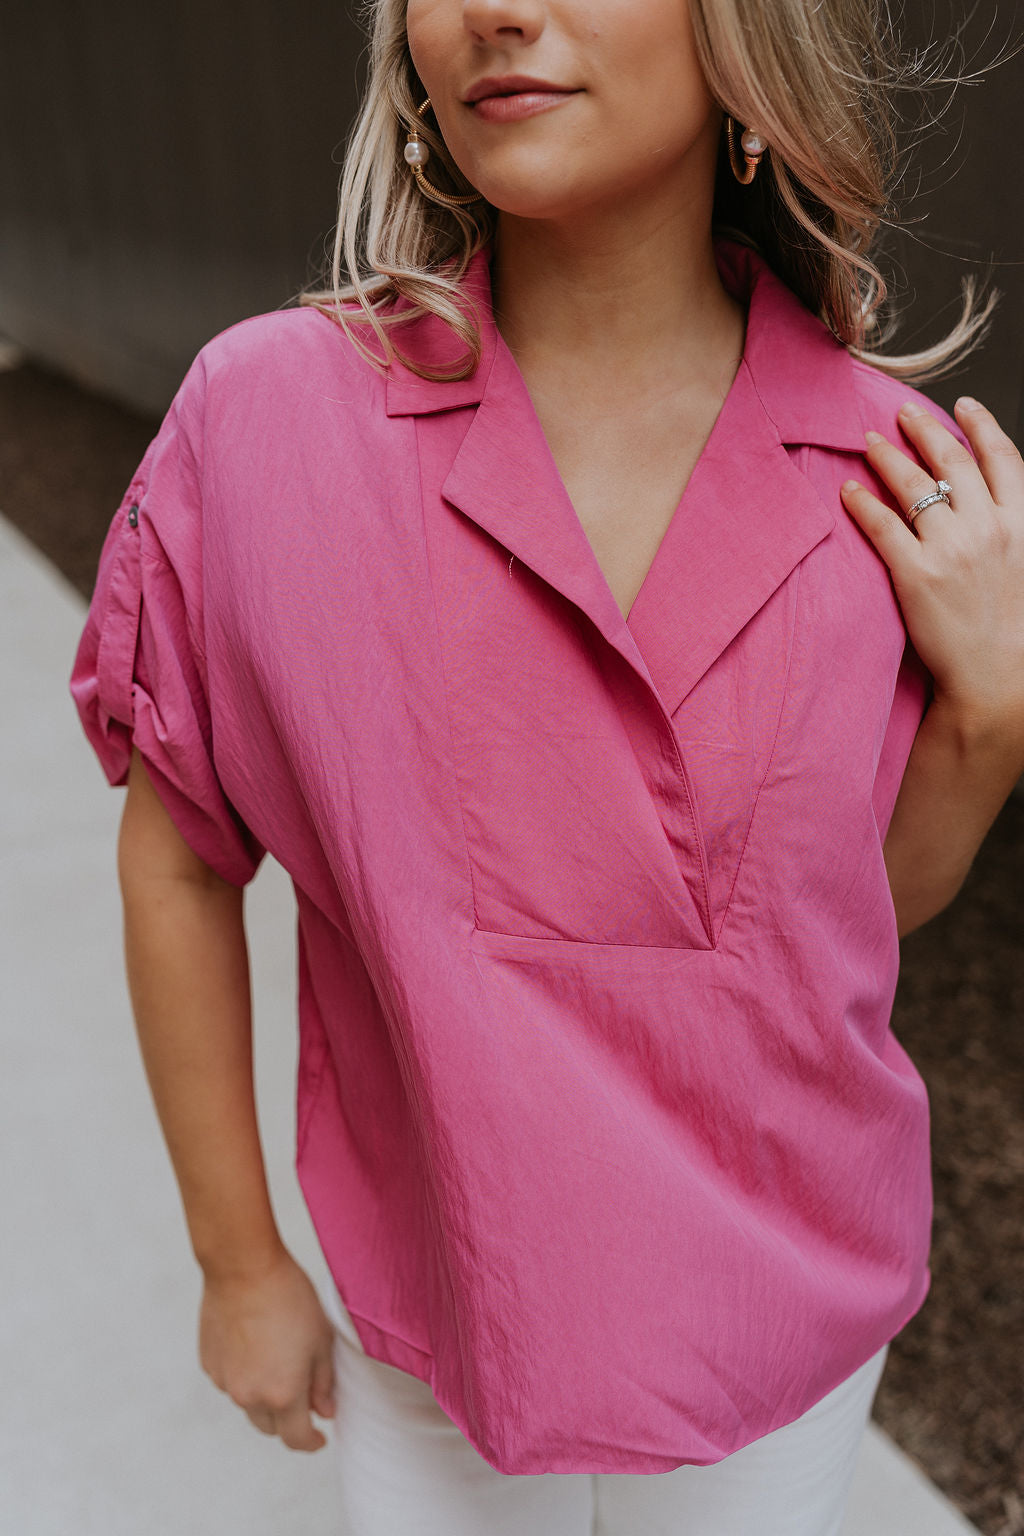 Close up view of female model wearing the Everlee Pink Short Sleeve Top which features Pink Lightweight Fabric, Short Sleeves with Pearlescent Buttoned Cuffs and Collar Neckline with V-Cutout